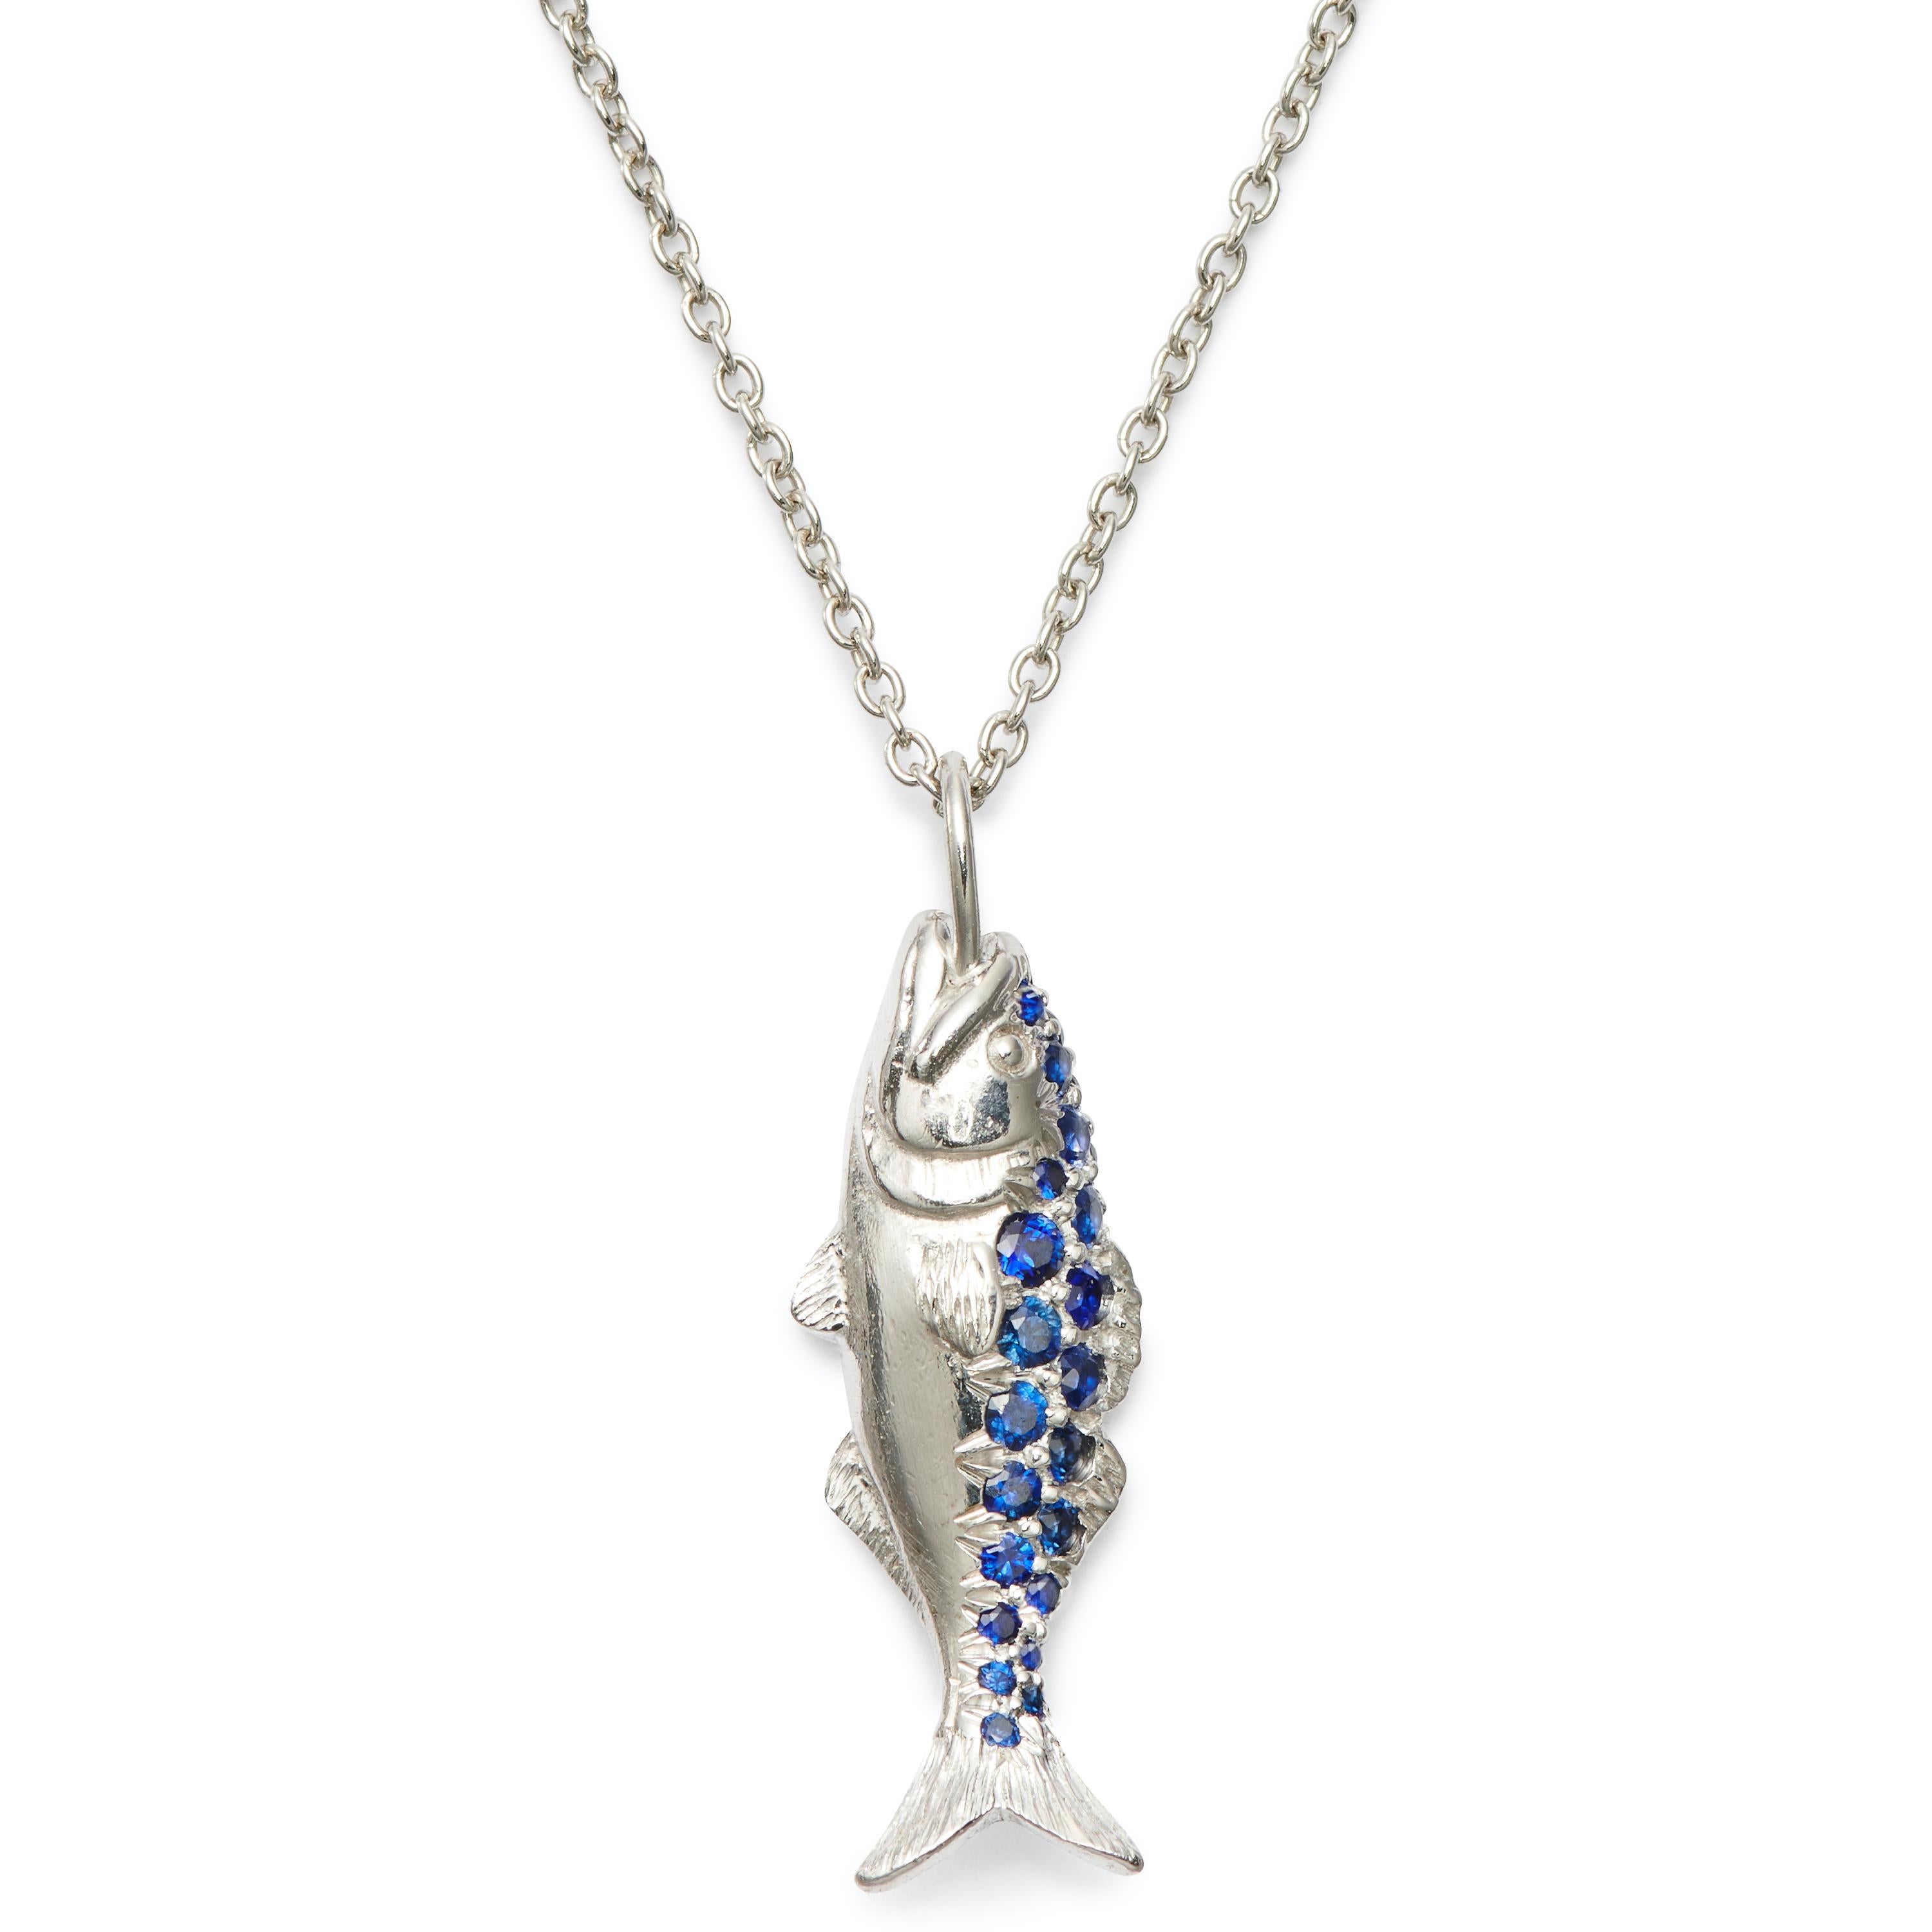 Blue Sapphires (0.61 Carat) shimmer like the sea in this 18 Karat Palladium White Gold Bluefish Charm / Small Pendant. Available in two sizes, to be worn individually, together or with Tuna and Striped Bass pendants from the collection. 

18 Karat